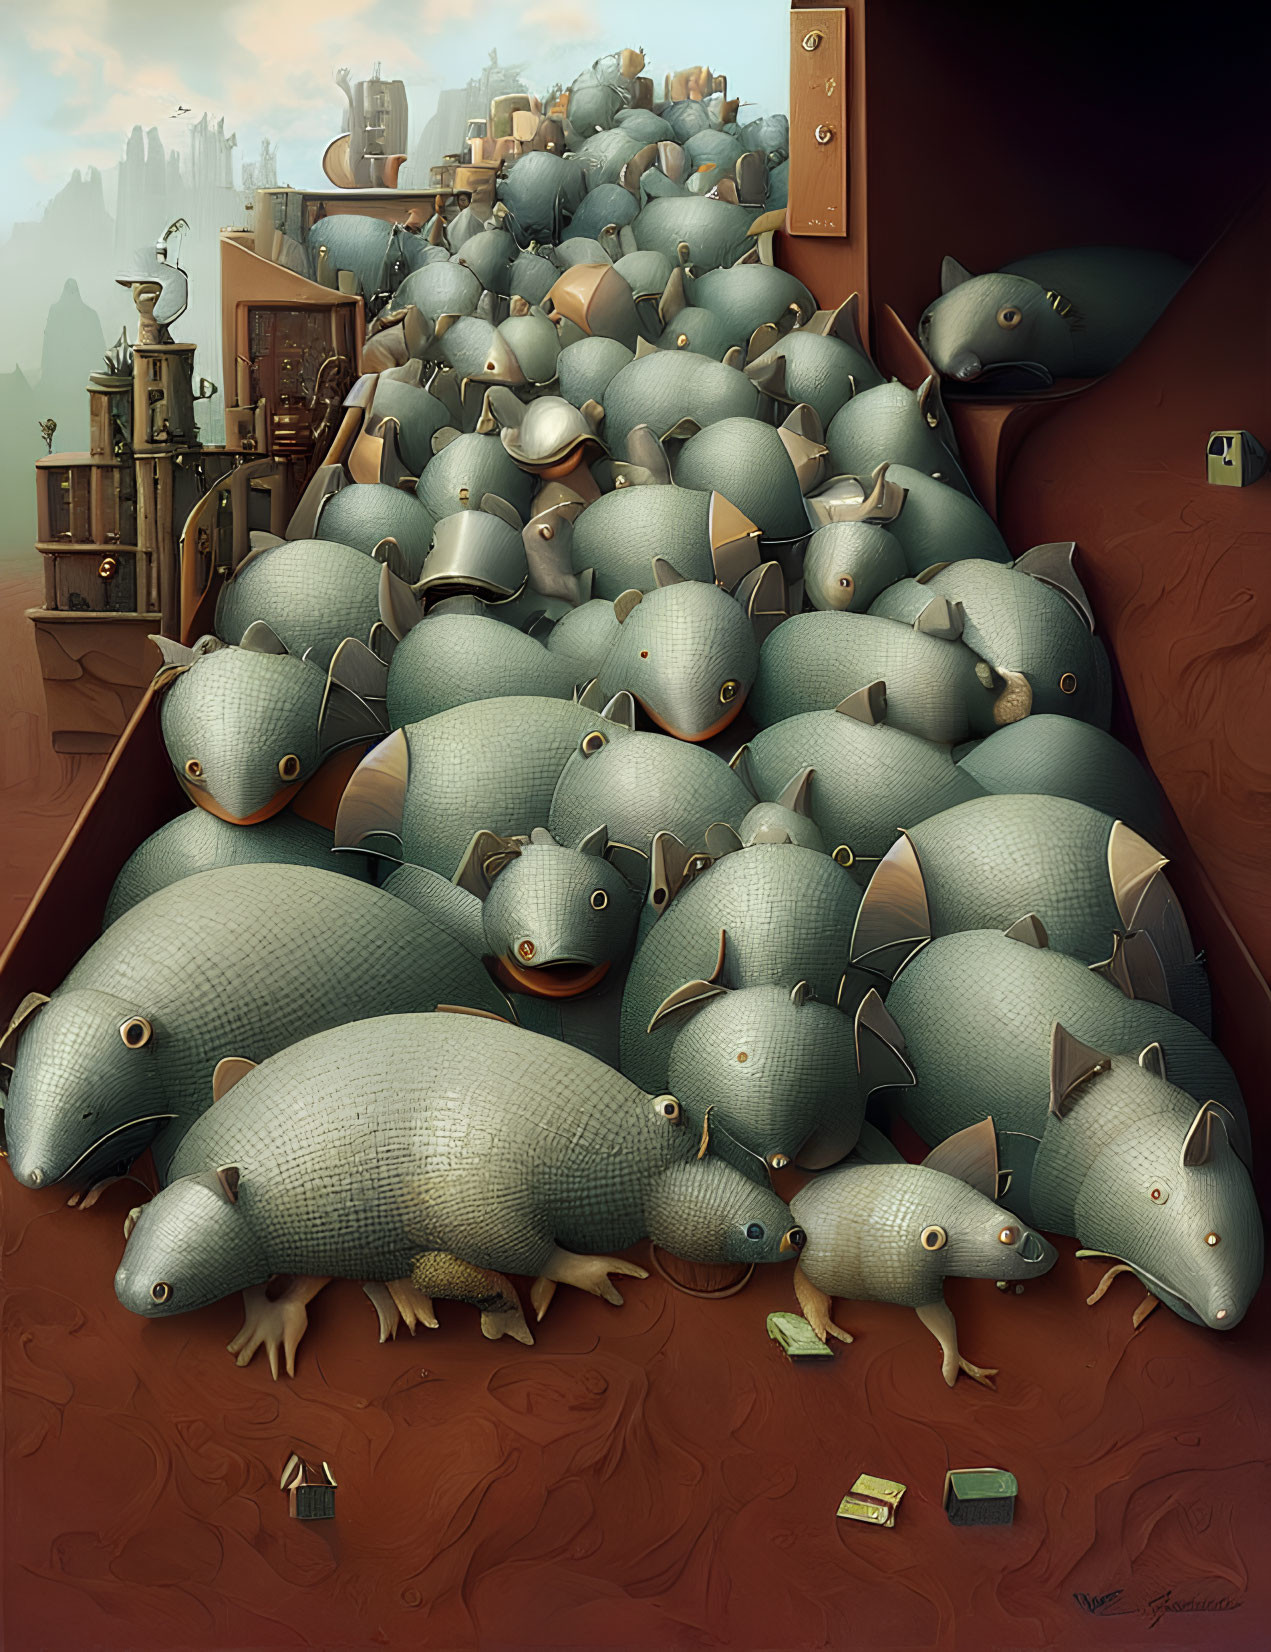 Illustration: Enormous pile of armor-clad fish with legs in surreal urban setting